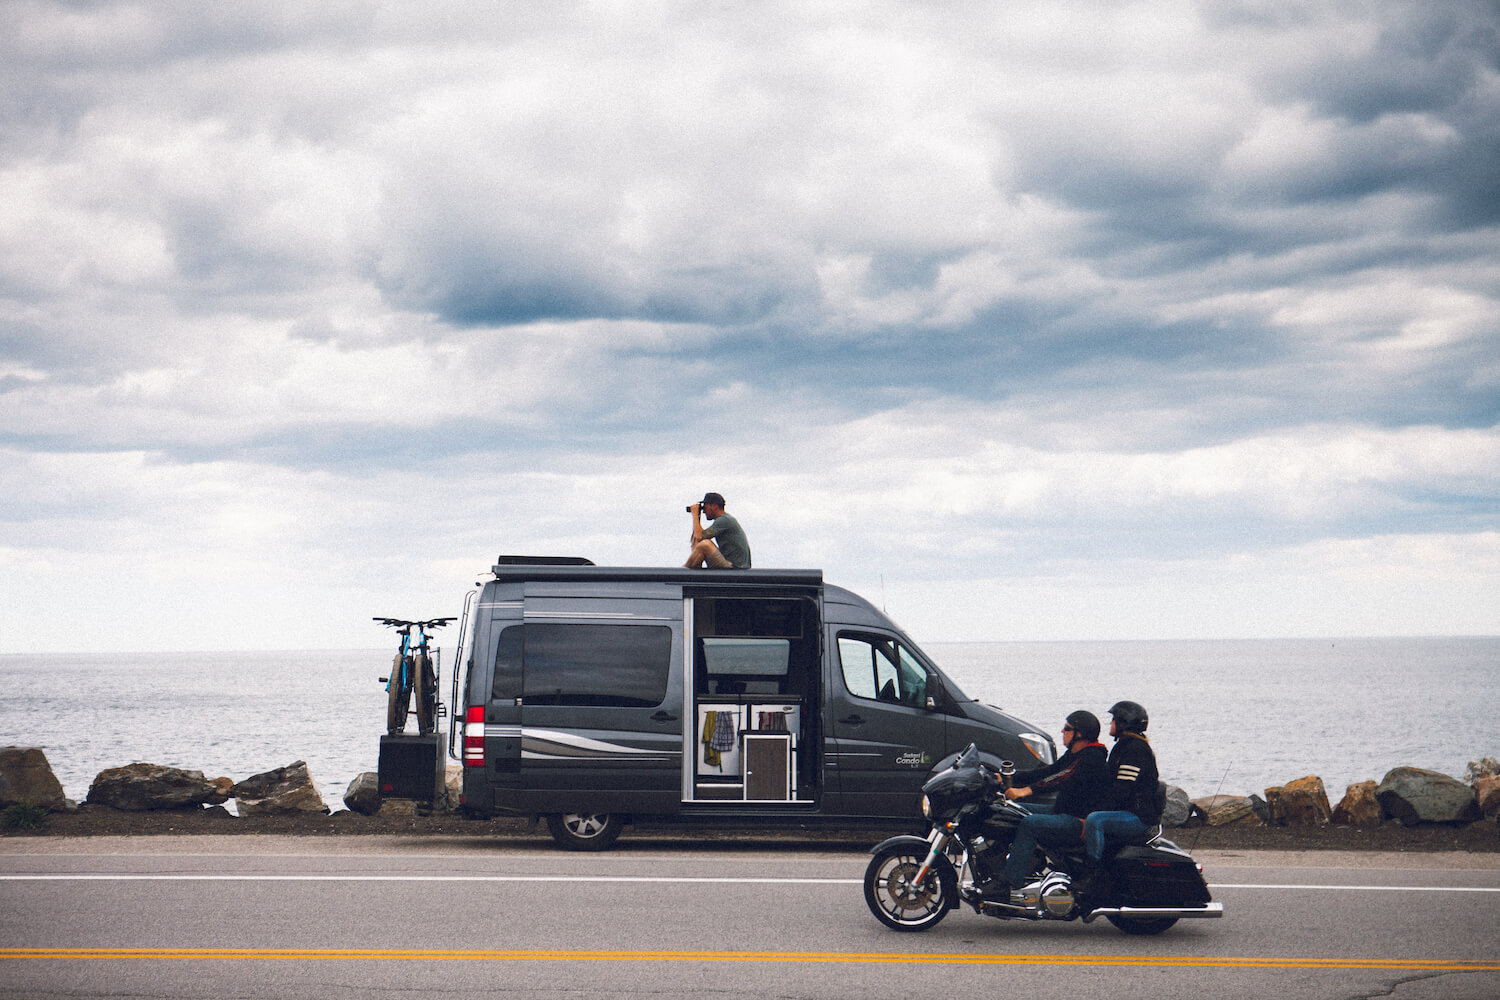 Mercedes sprinter and motorcycle with view